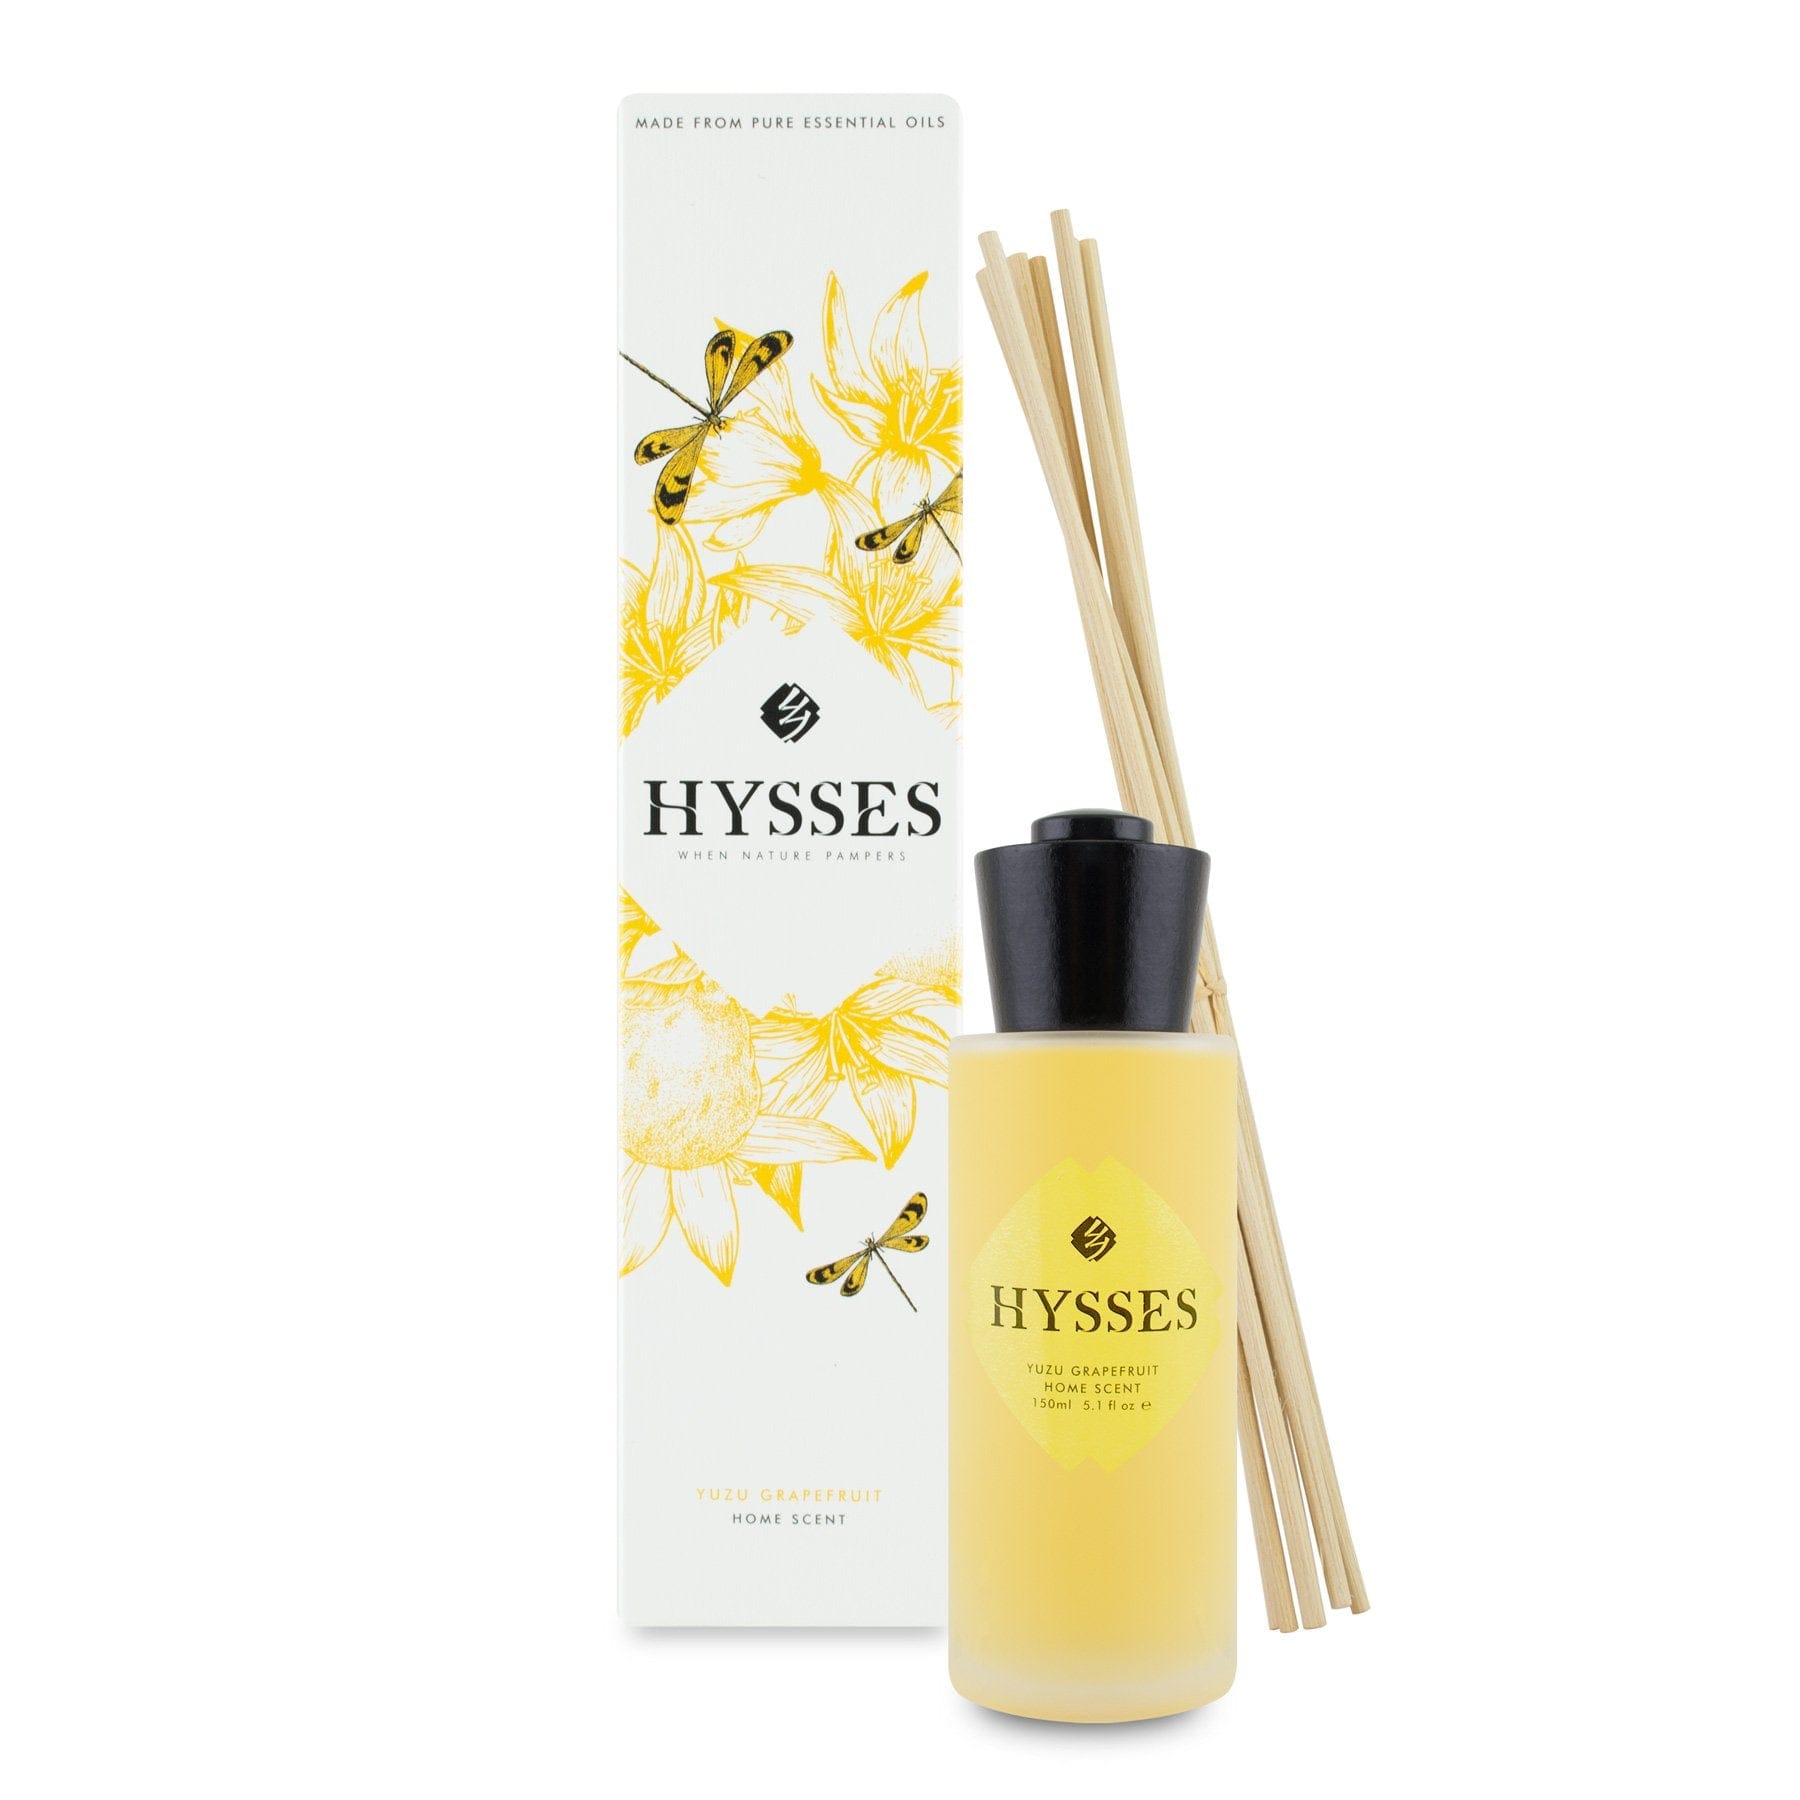 Hysses Home Scents 60ml Home Scent Reed Diffuser Yuzu Grapefruit